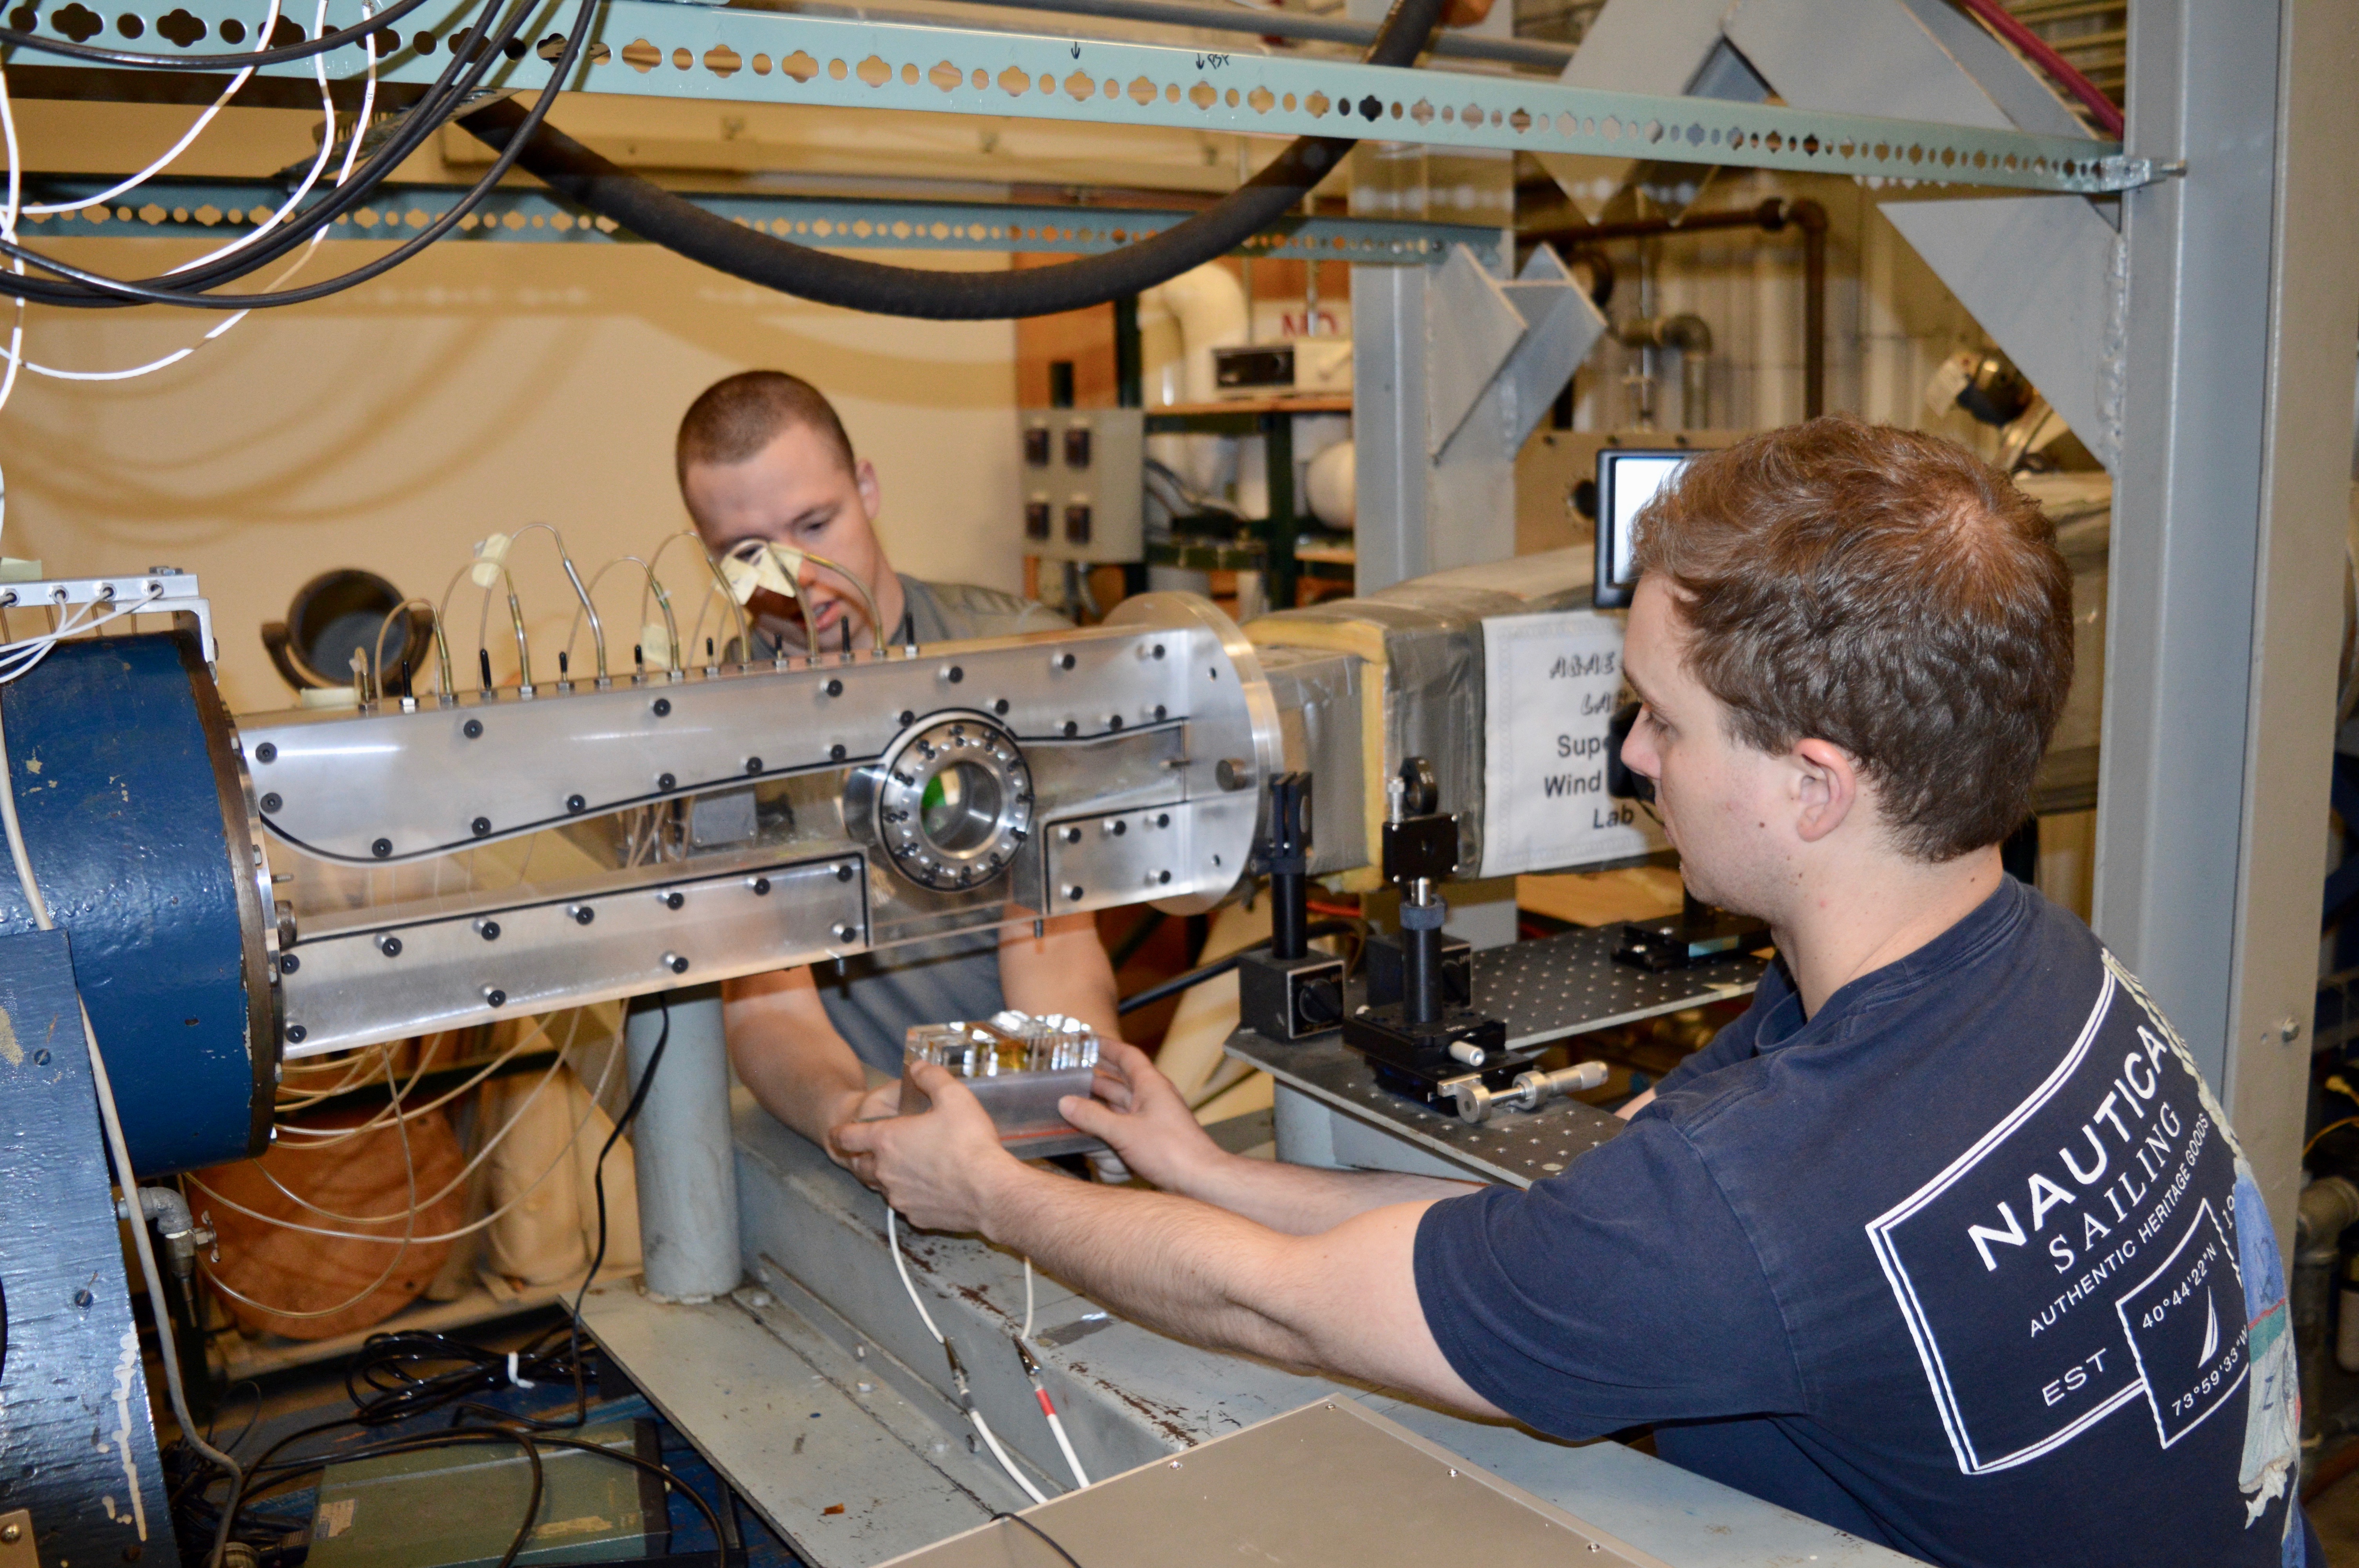 Paul Stockett (left) and Kyle Newnam (right) set up an actuator test in the supersonic wind tunnel at Purdue’s Aerospace Sciences Laboratory.